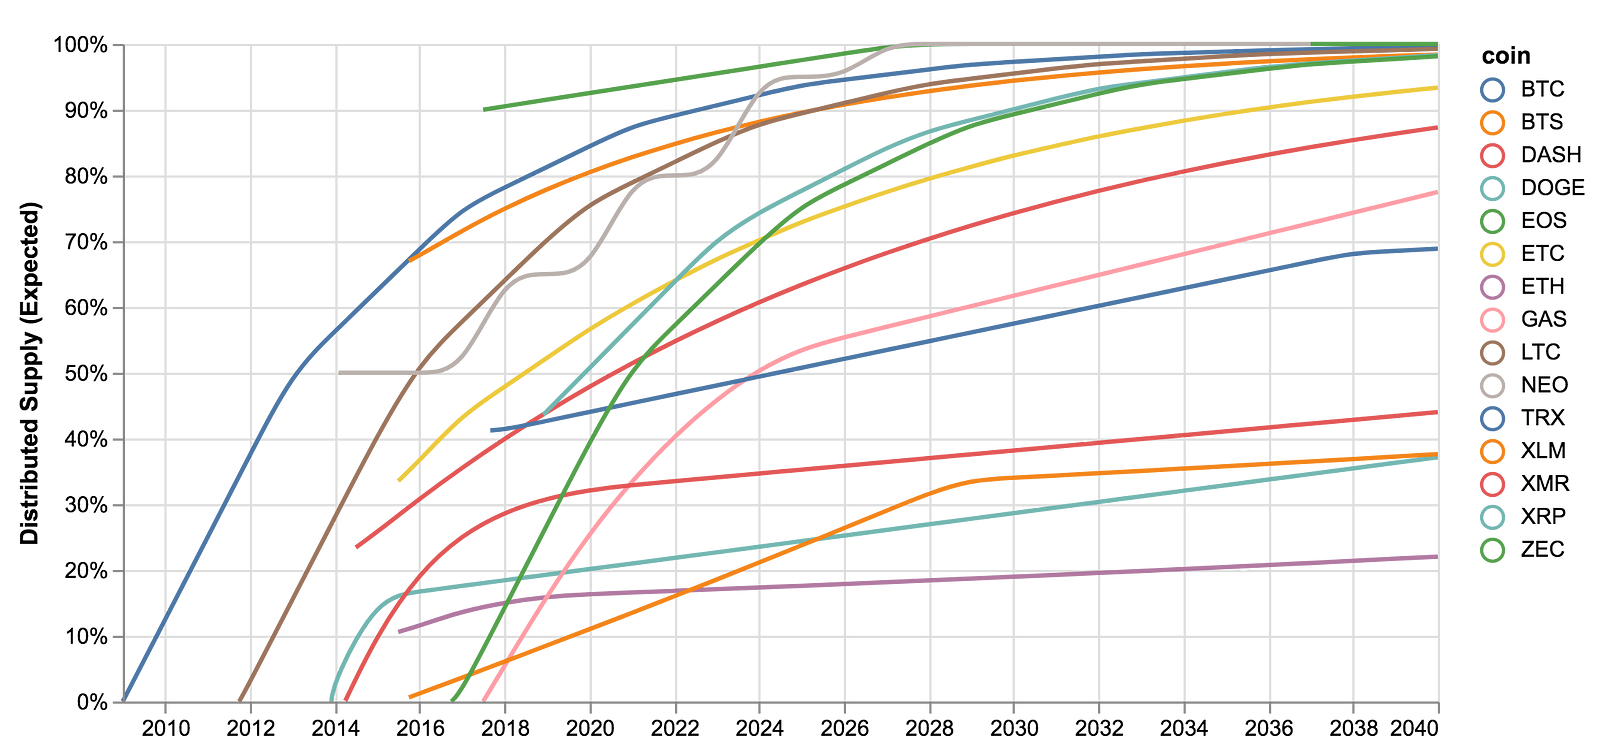 Bitcoin Inflation Rate Compared to the FIAT Currencies Inflation (6 Countries)